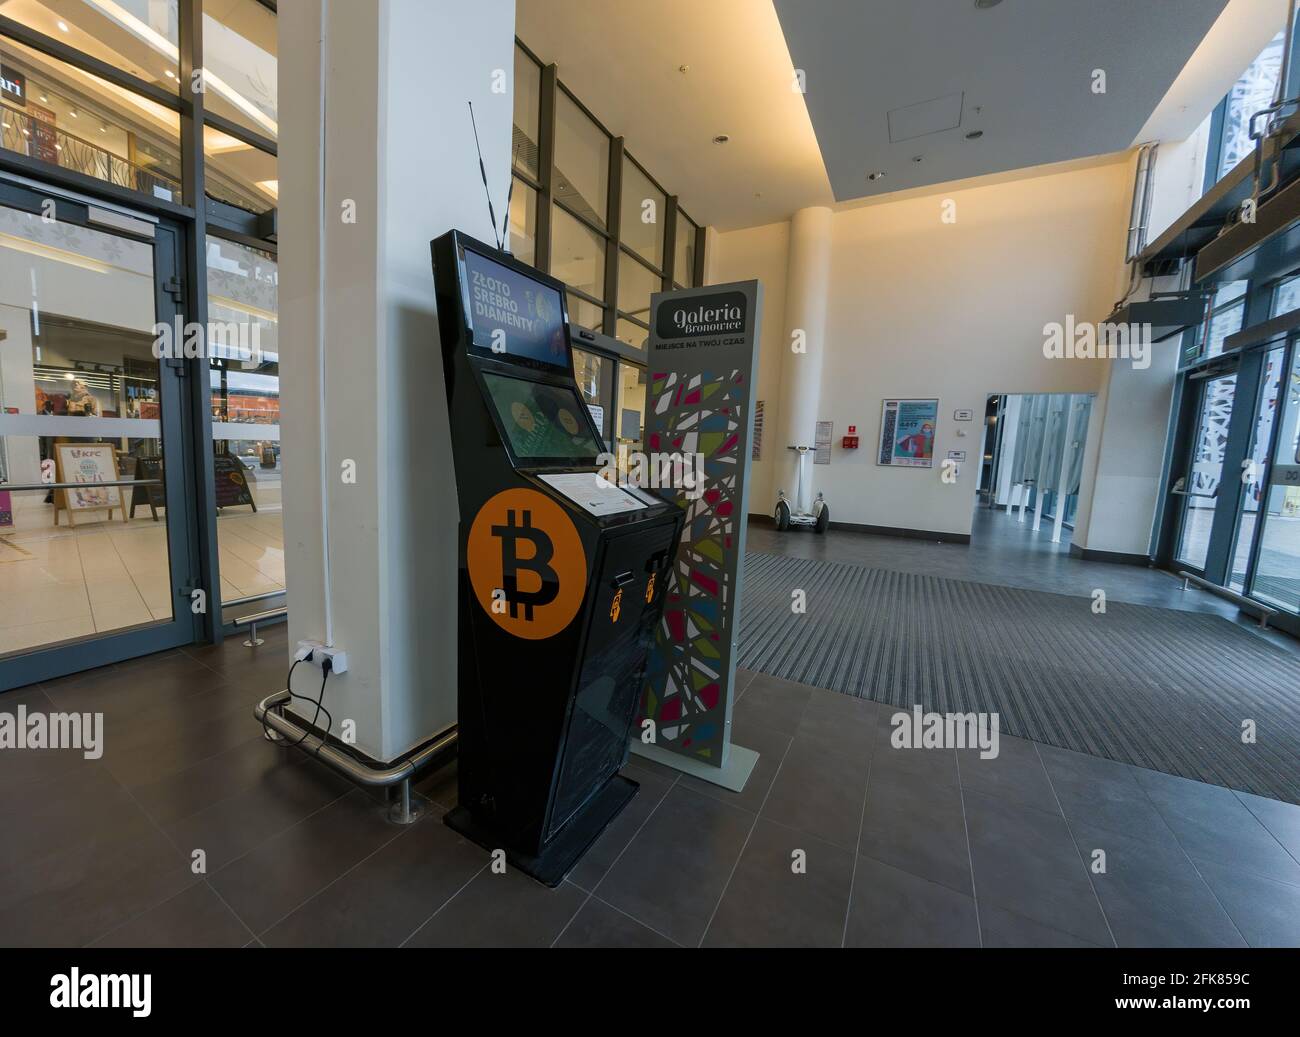 Krakow, Poland - April 28, 2021: Online currency Bitcoin vending machine cryptocurrency dispenser in shopping centre mall entrance, Europe Stock Photo